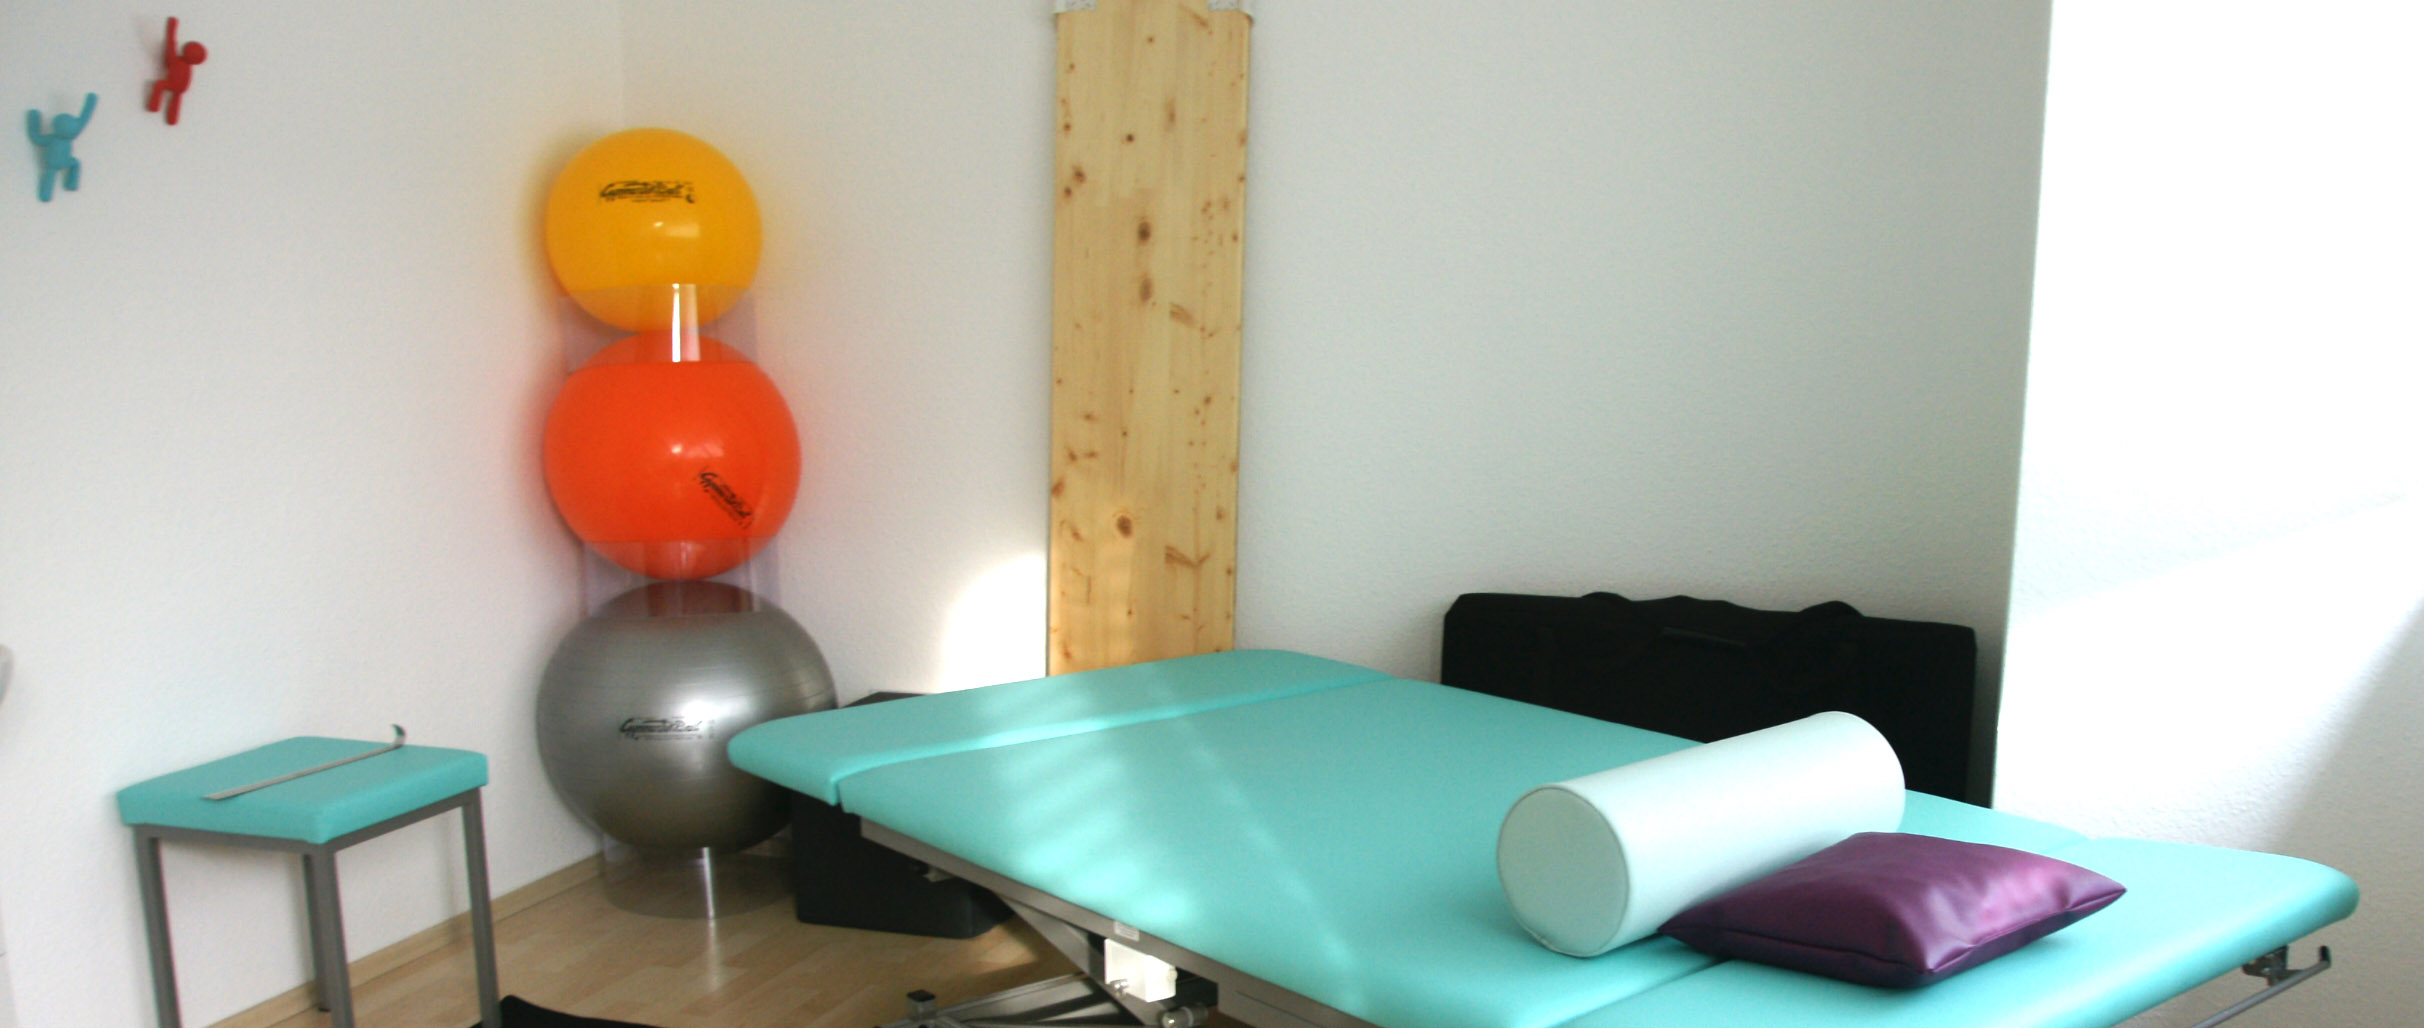 Fit durch Physiotherapie in Alzey bei Bianca Lenz 